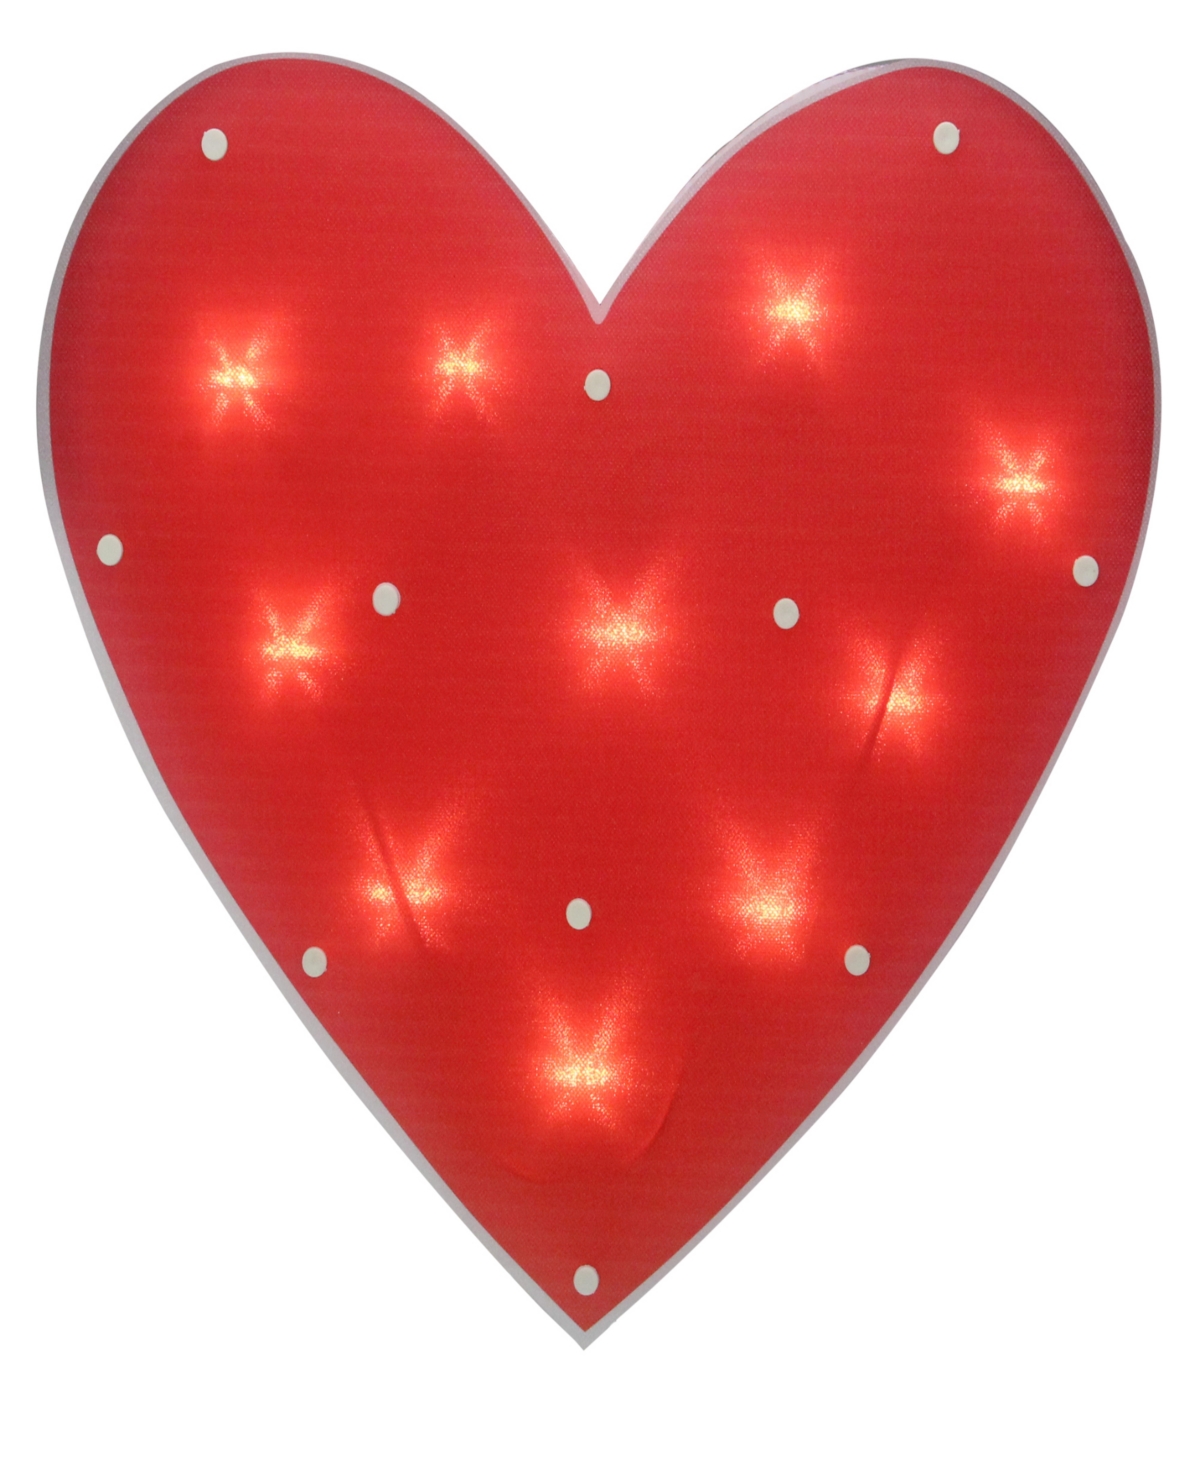 Northlight 14.25" Lighted Heart Valentine's Day Window Silhouette Decoration In Red